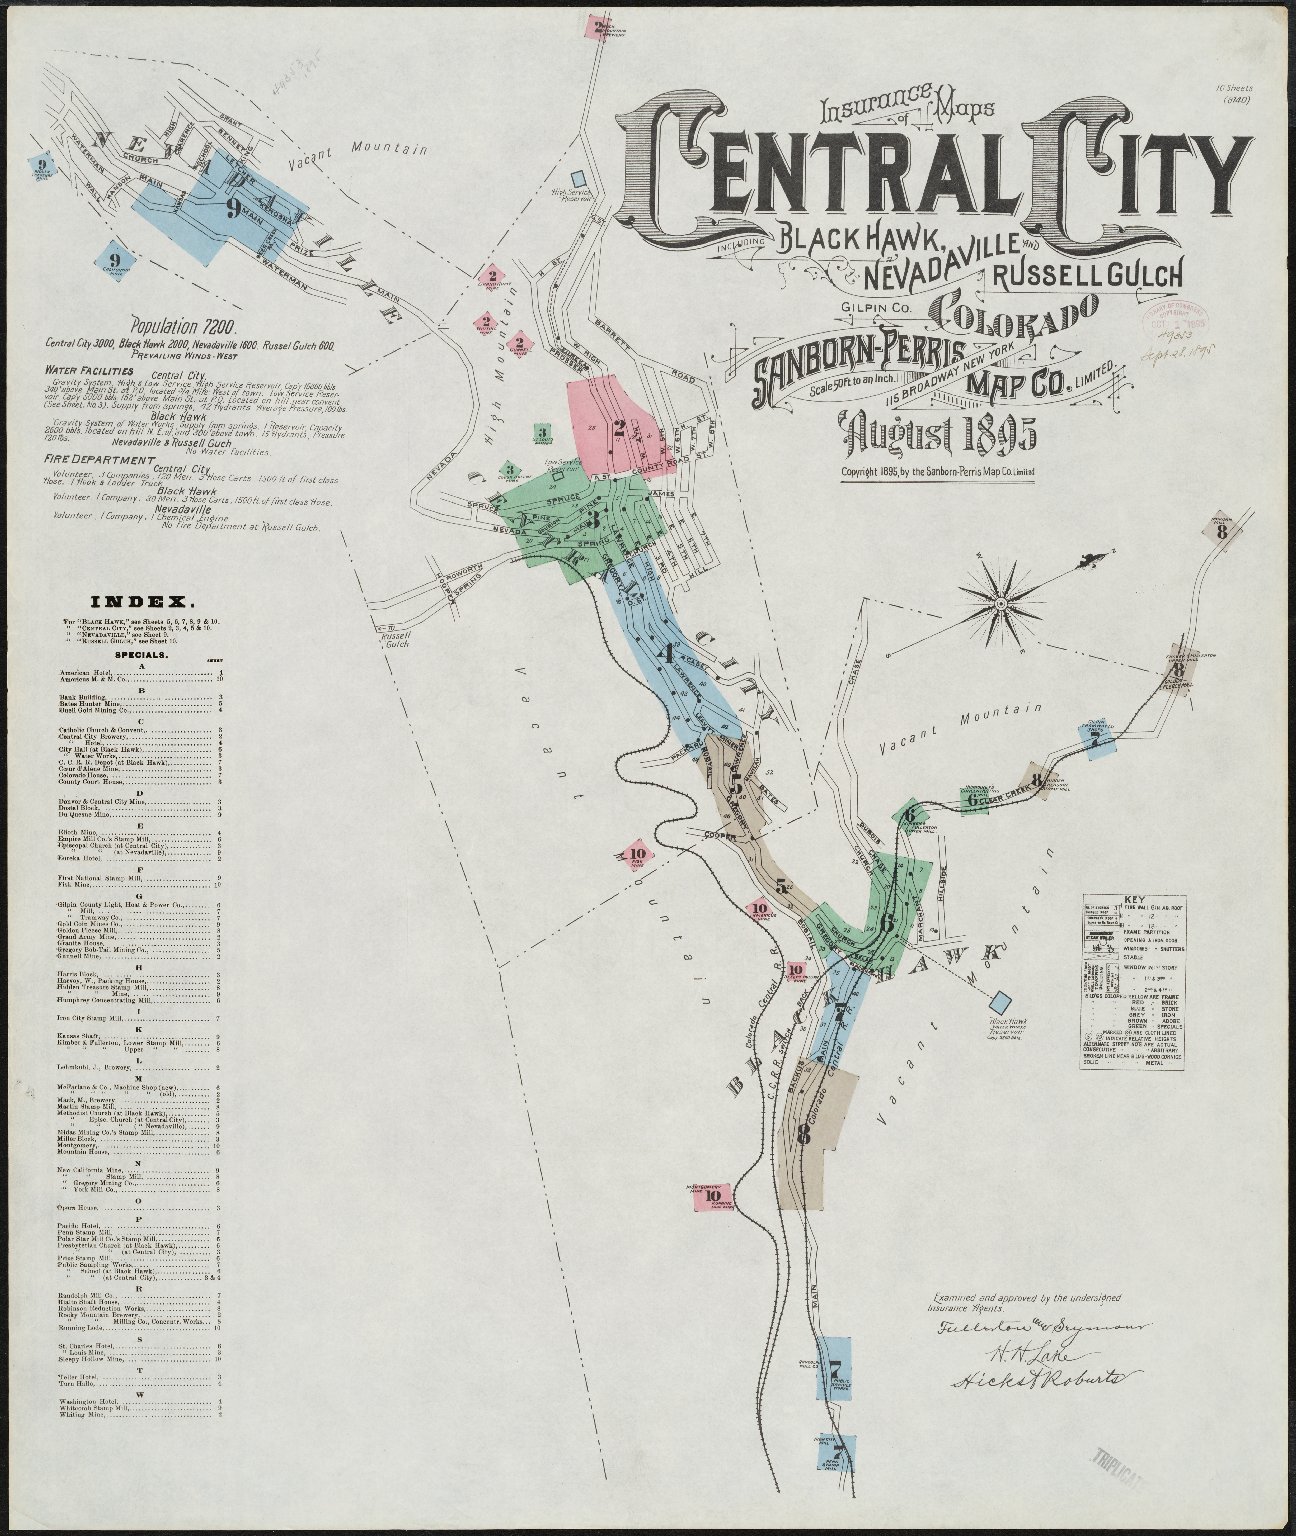 Insurance maps of Central City, including Black Hawk, Nevadaville, and Russell Gulch, Gilpin Co., Colorado